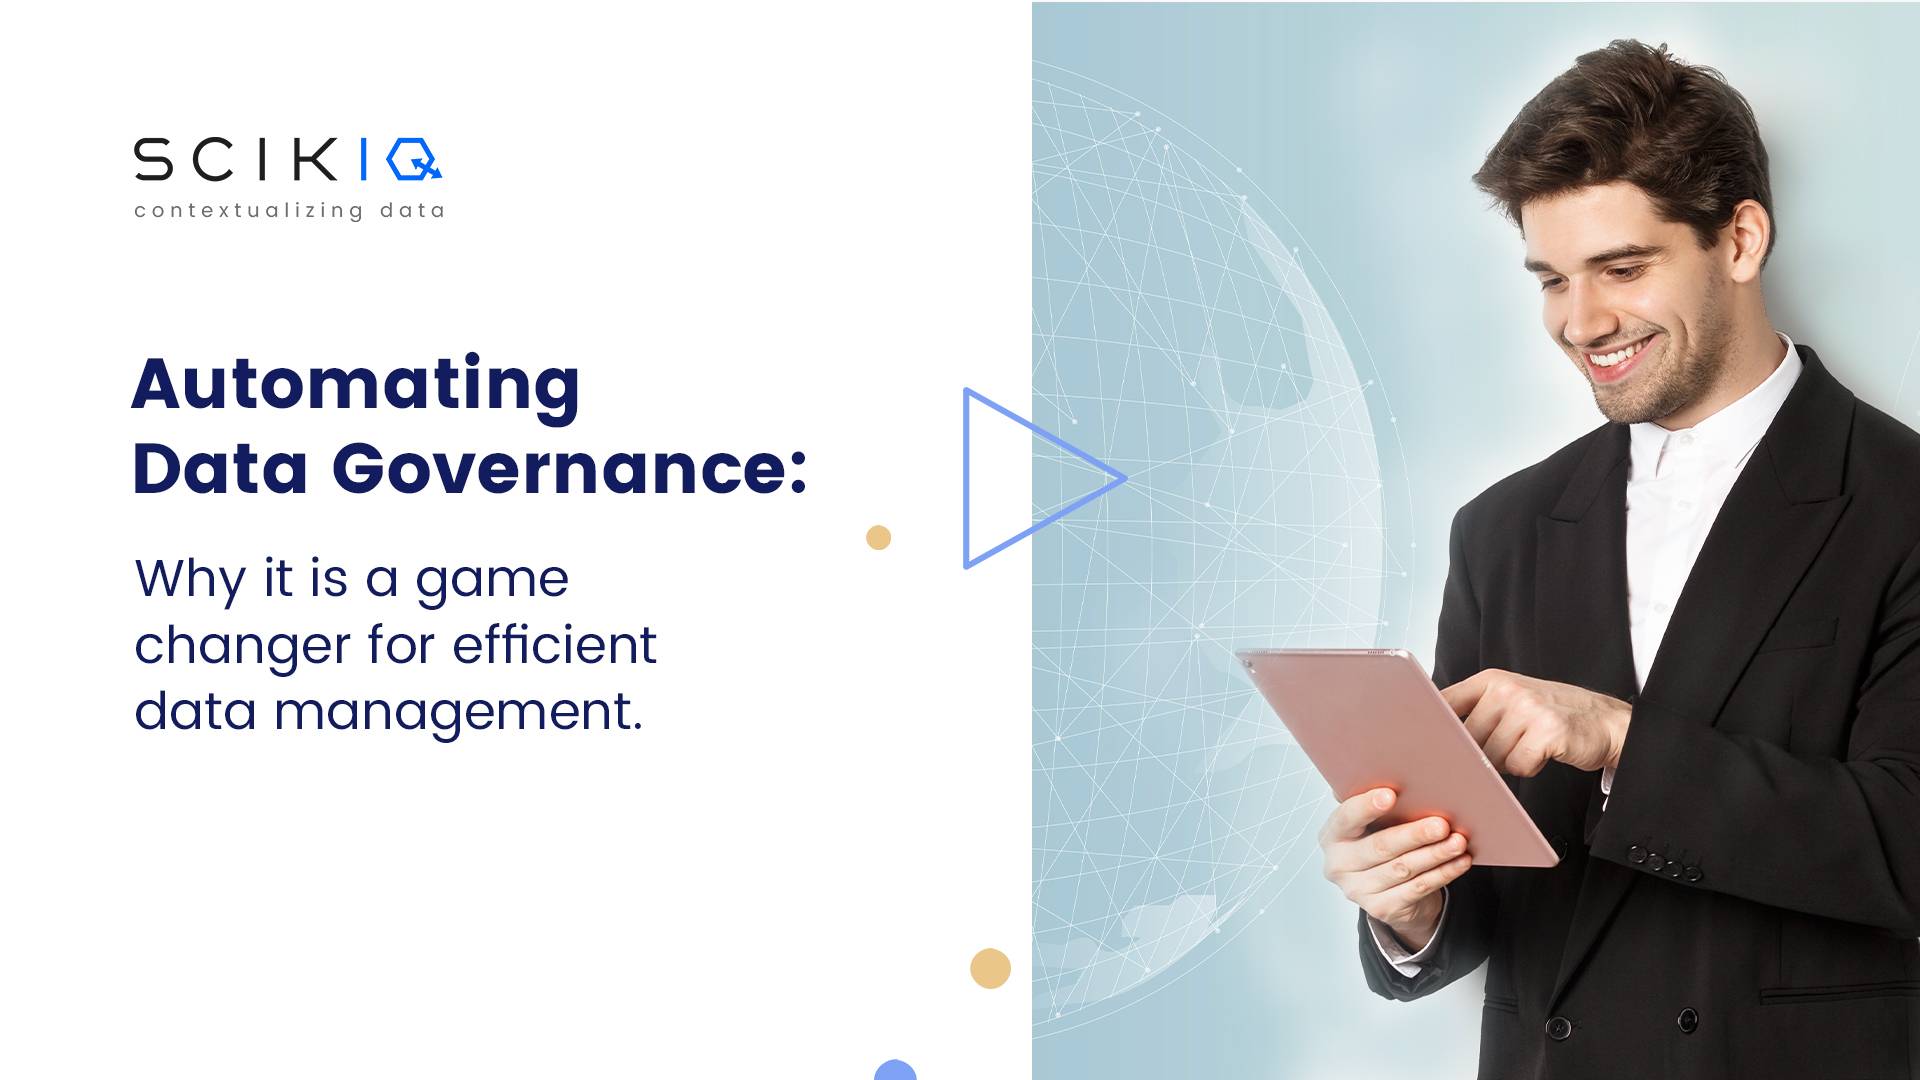 Automating Data Governance: Why it is a game changer for efficient data management.